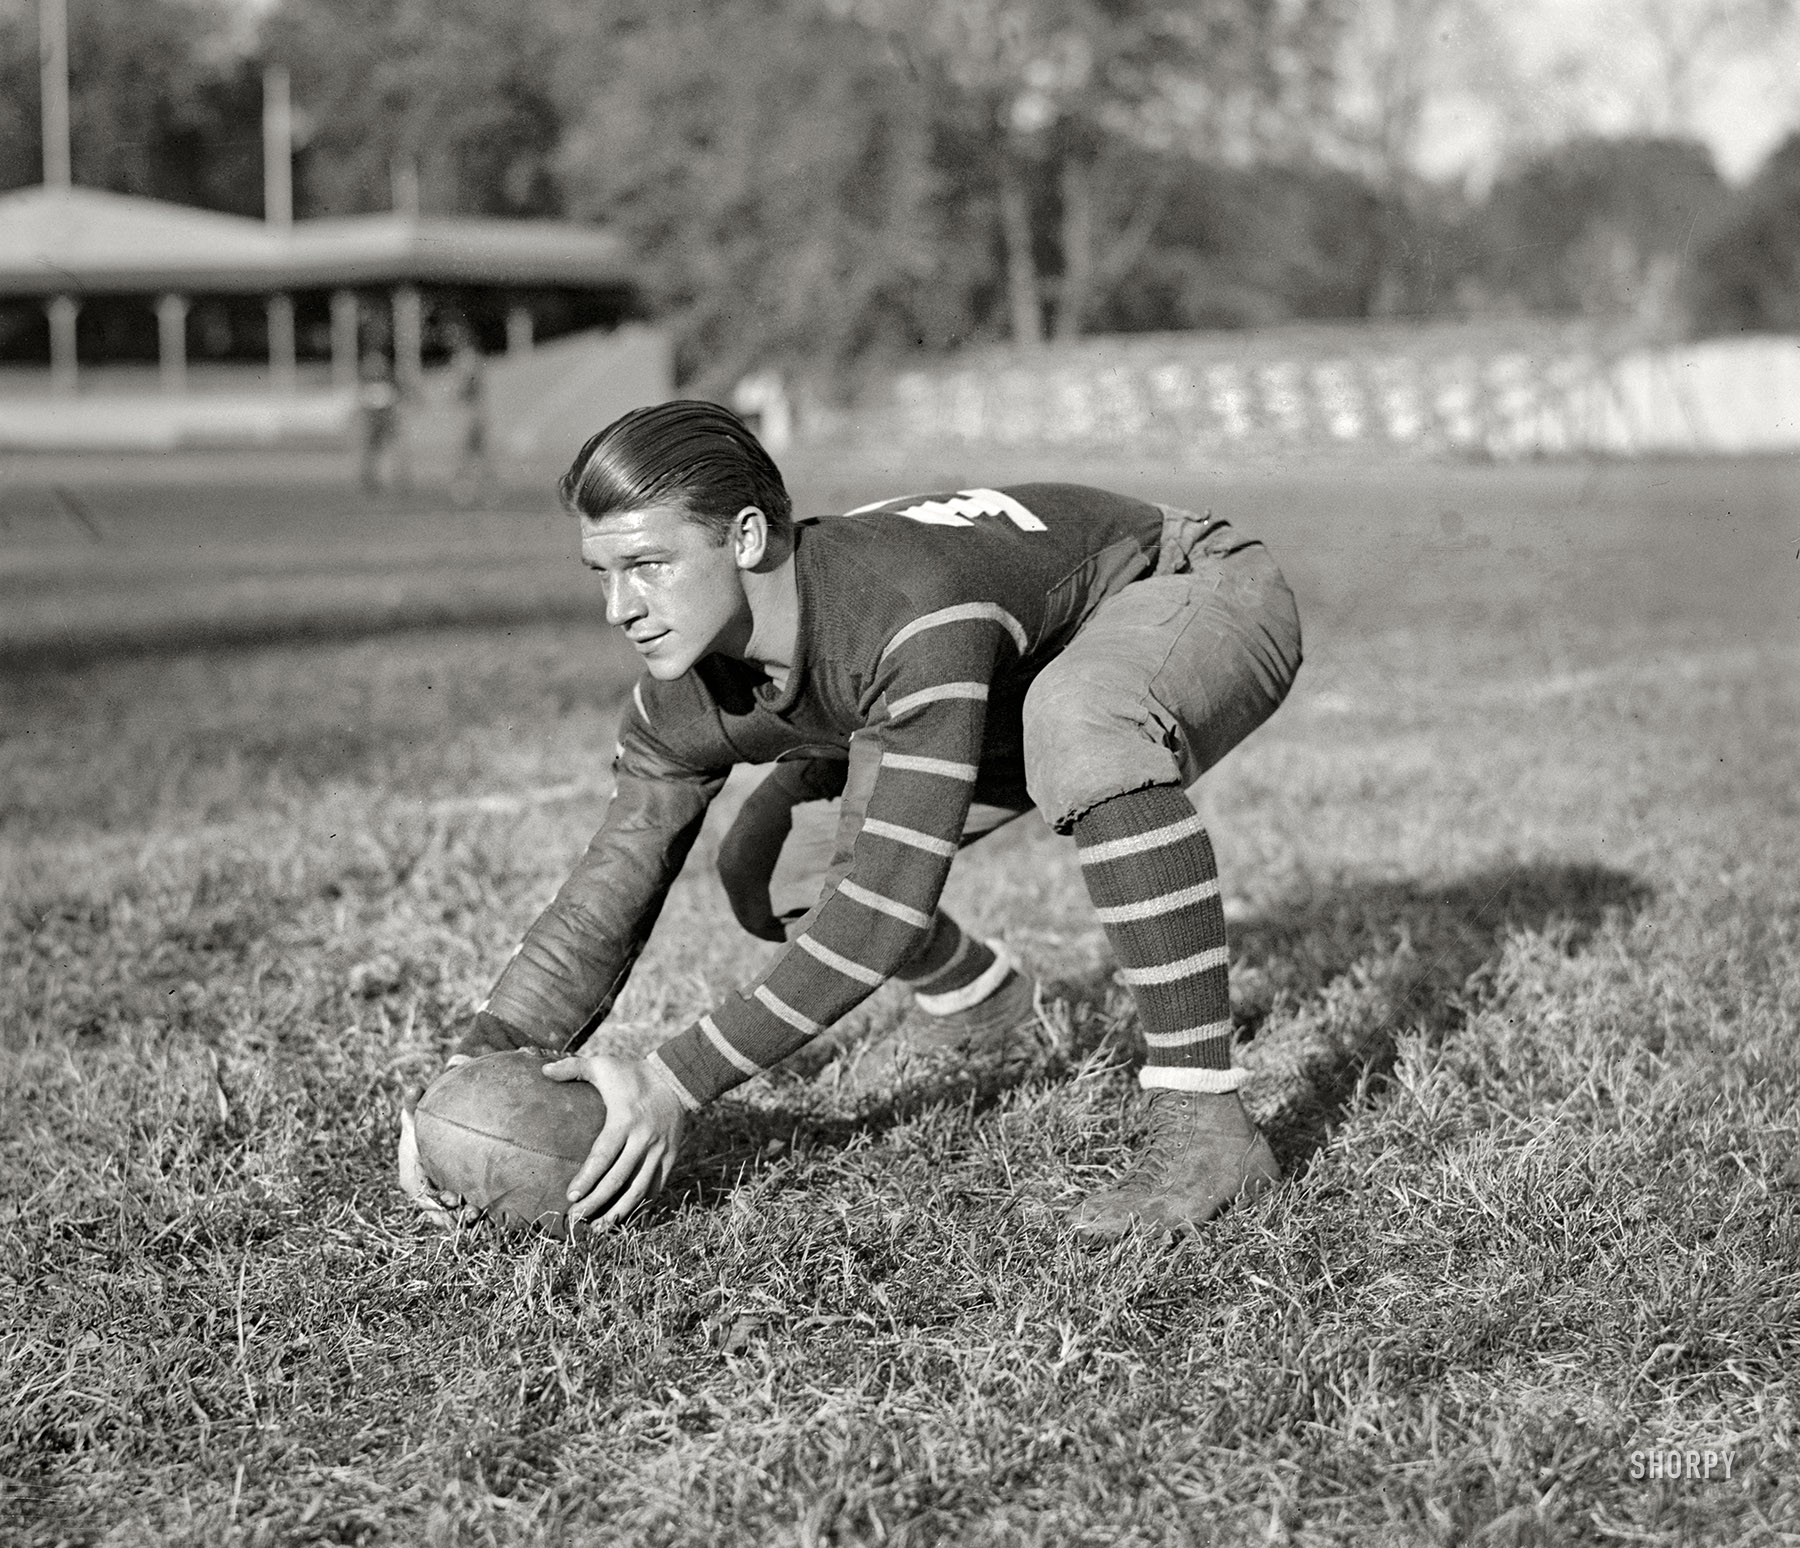 Washington, D.C., 1925. "Grigsby, Georgetown." Hilltop star center Claude Grigsby, "a well-built, iron-muscled lad from Chicago," according to the Washington Post. National Photo Company glass negative. View full size.